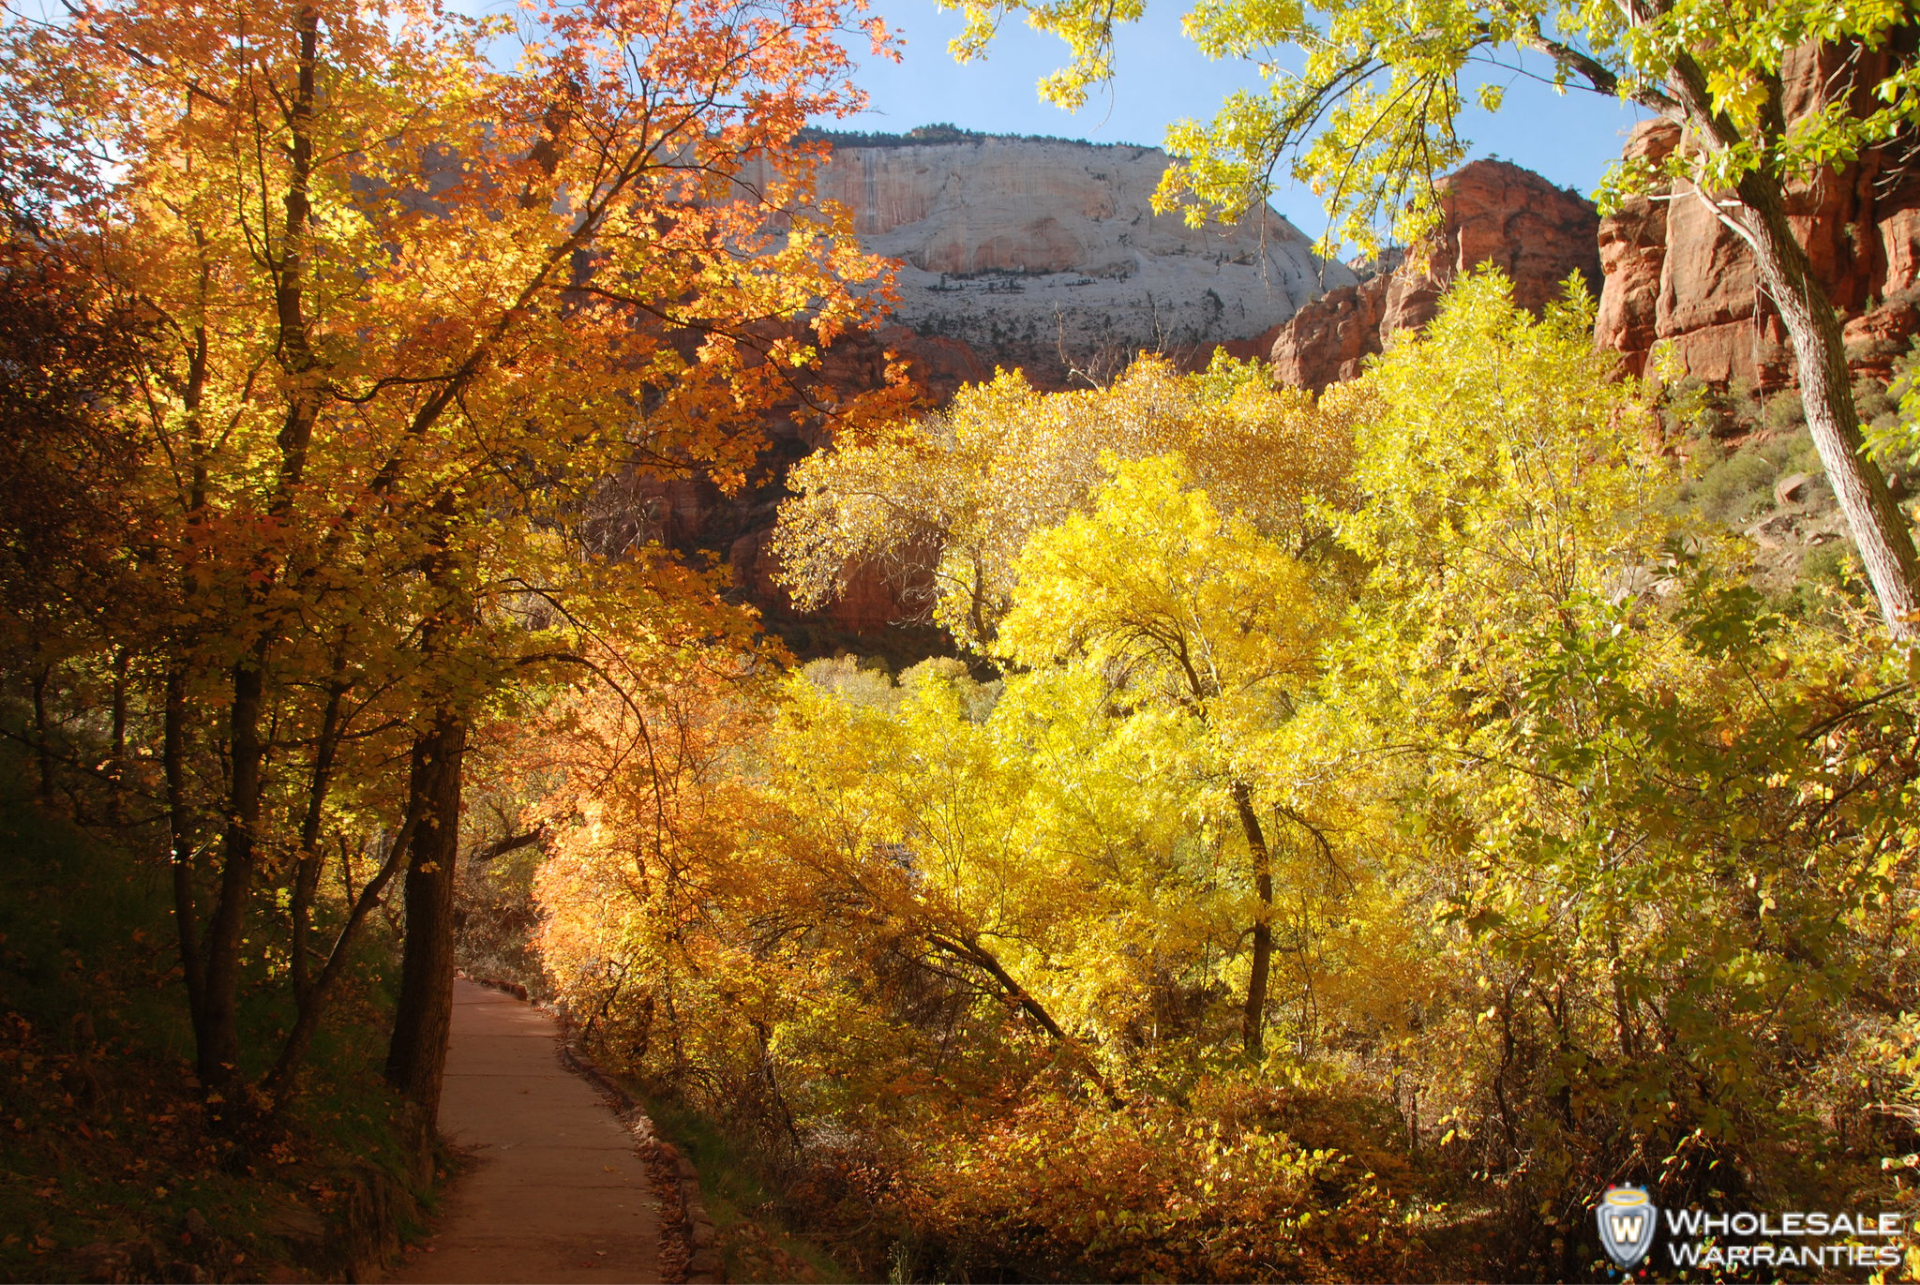 Fall foliage colors in Zion National Park in Utah